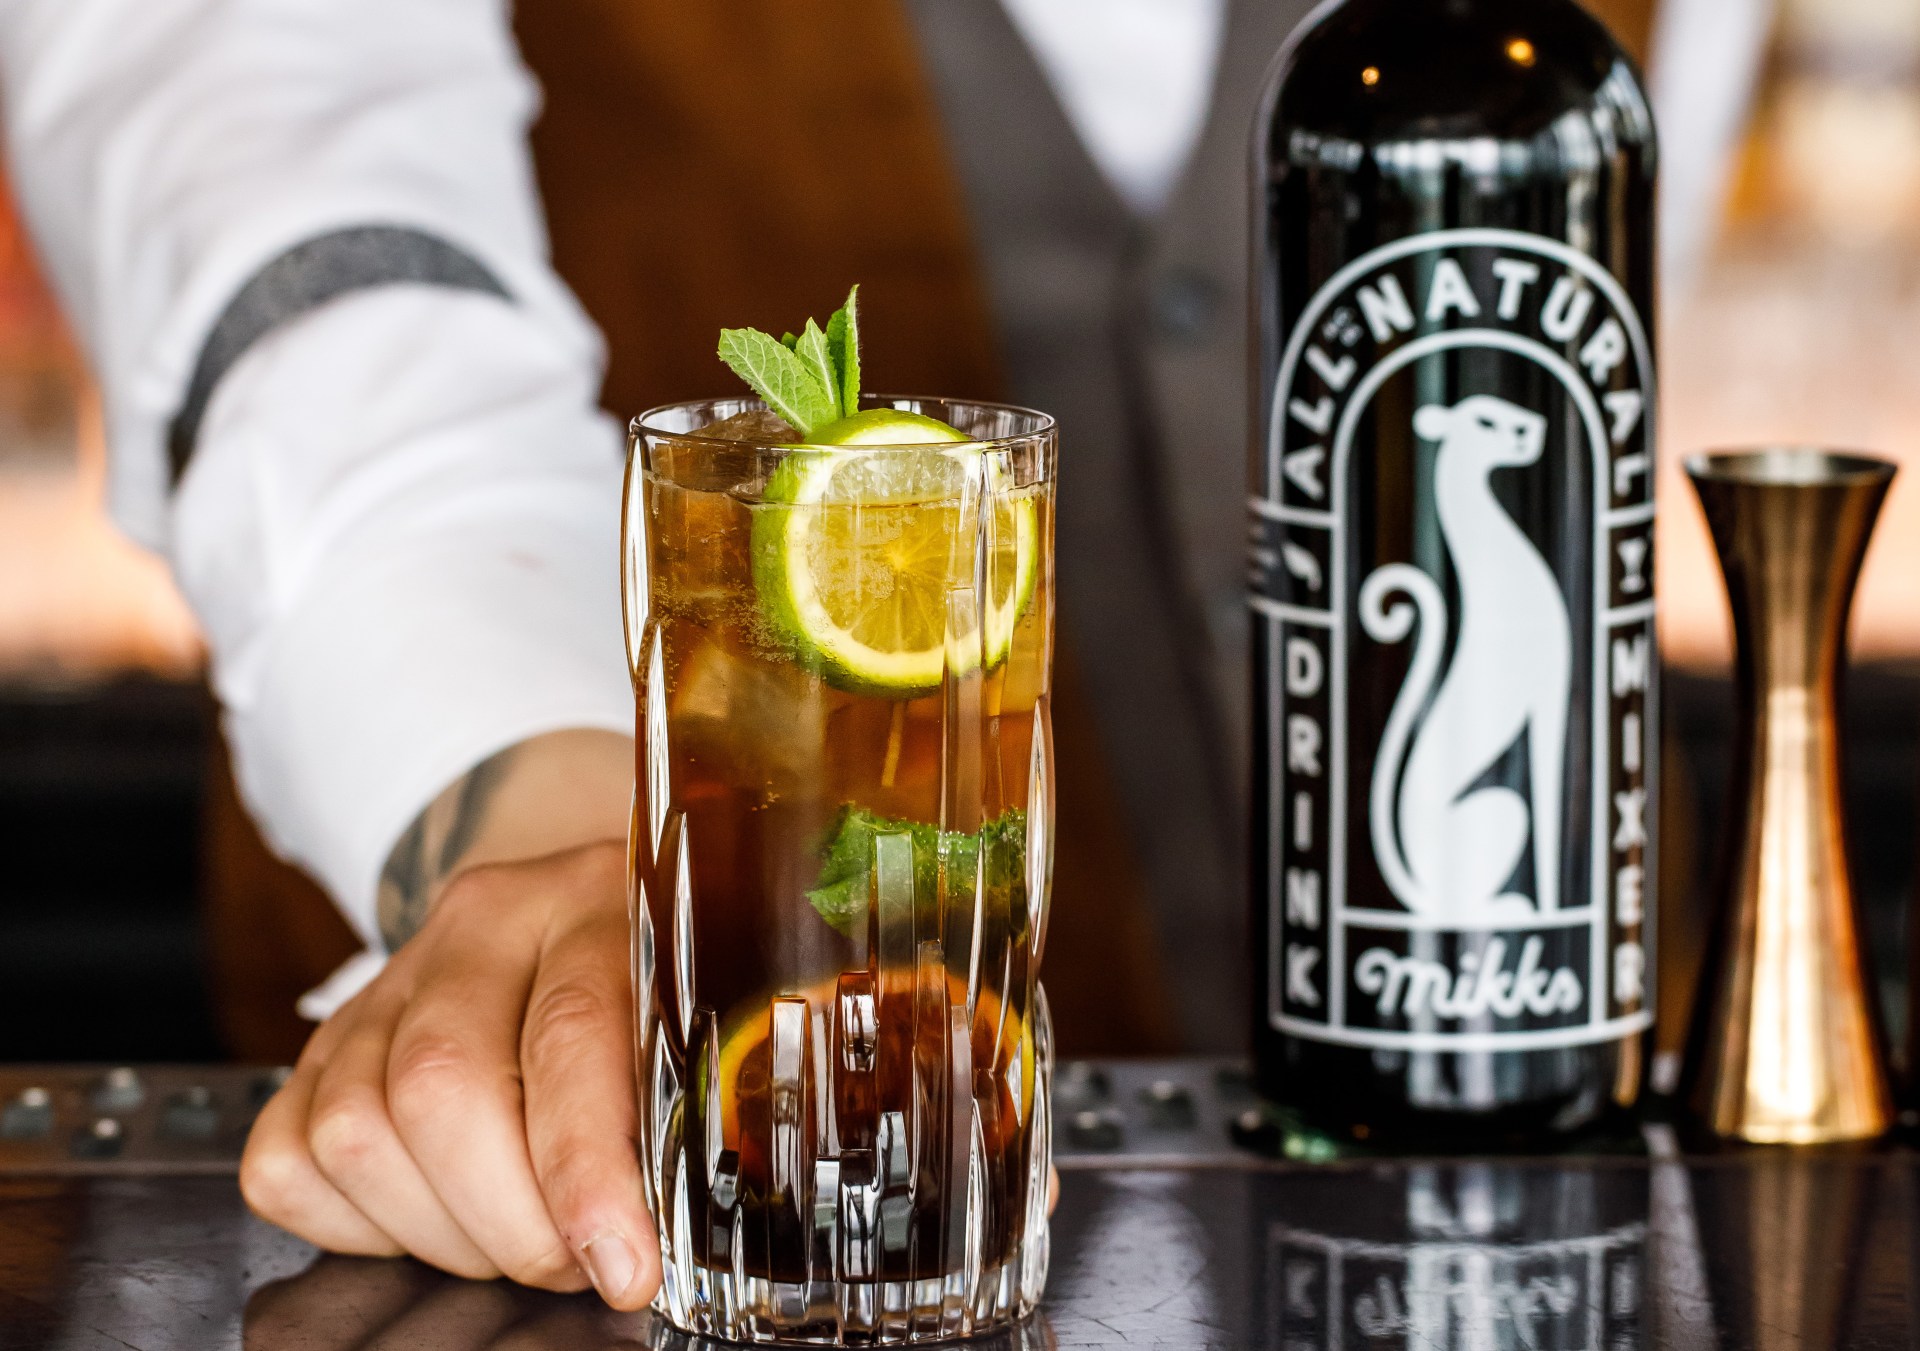 Roam Free cocktails at Savage Garden LDN -Virgin coldbrew mojito from Canopy by Hilton London City